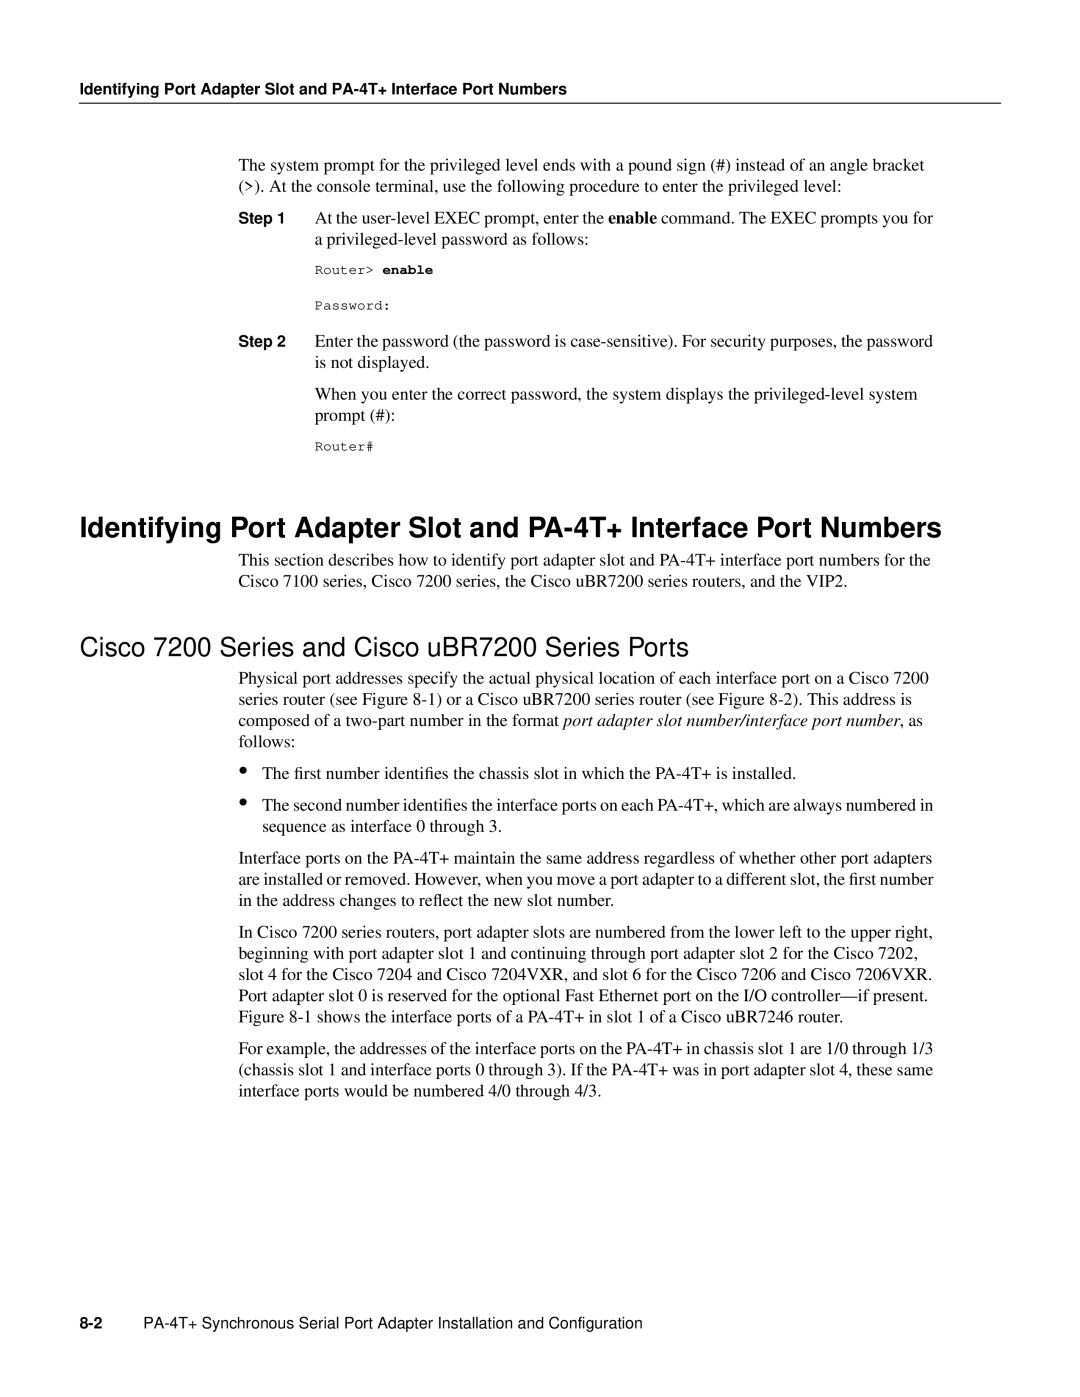 Cisco Systems manual Identifying Port Adapter Slot and PA-4T+ Interface Port Numbers 